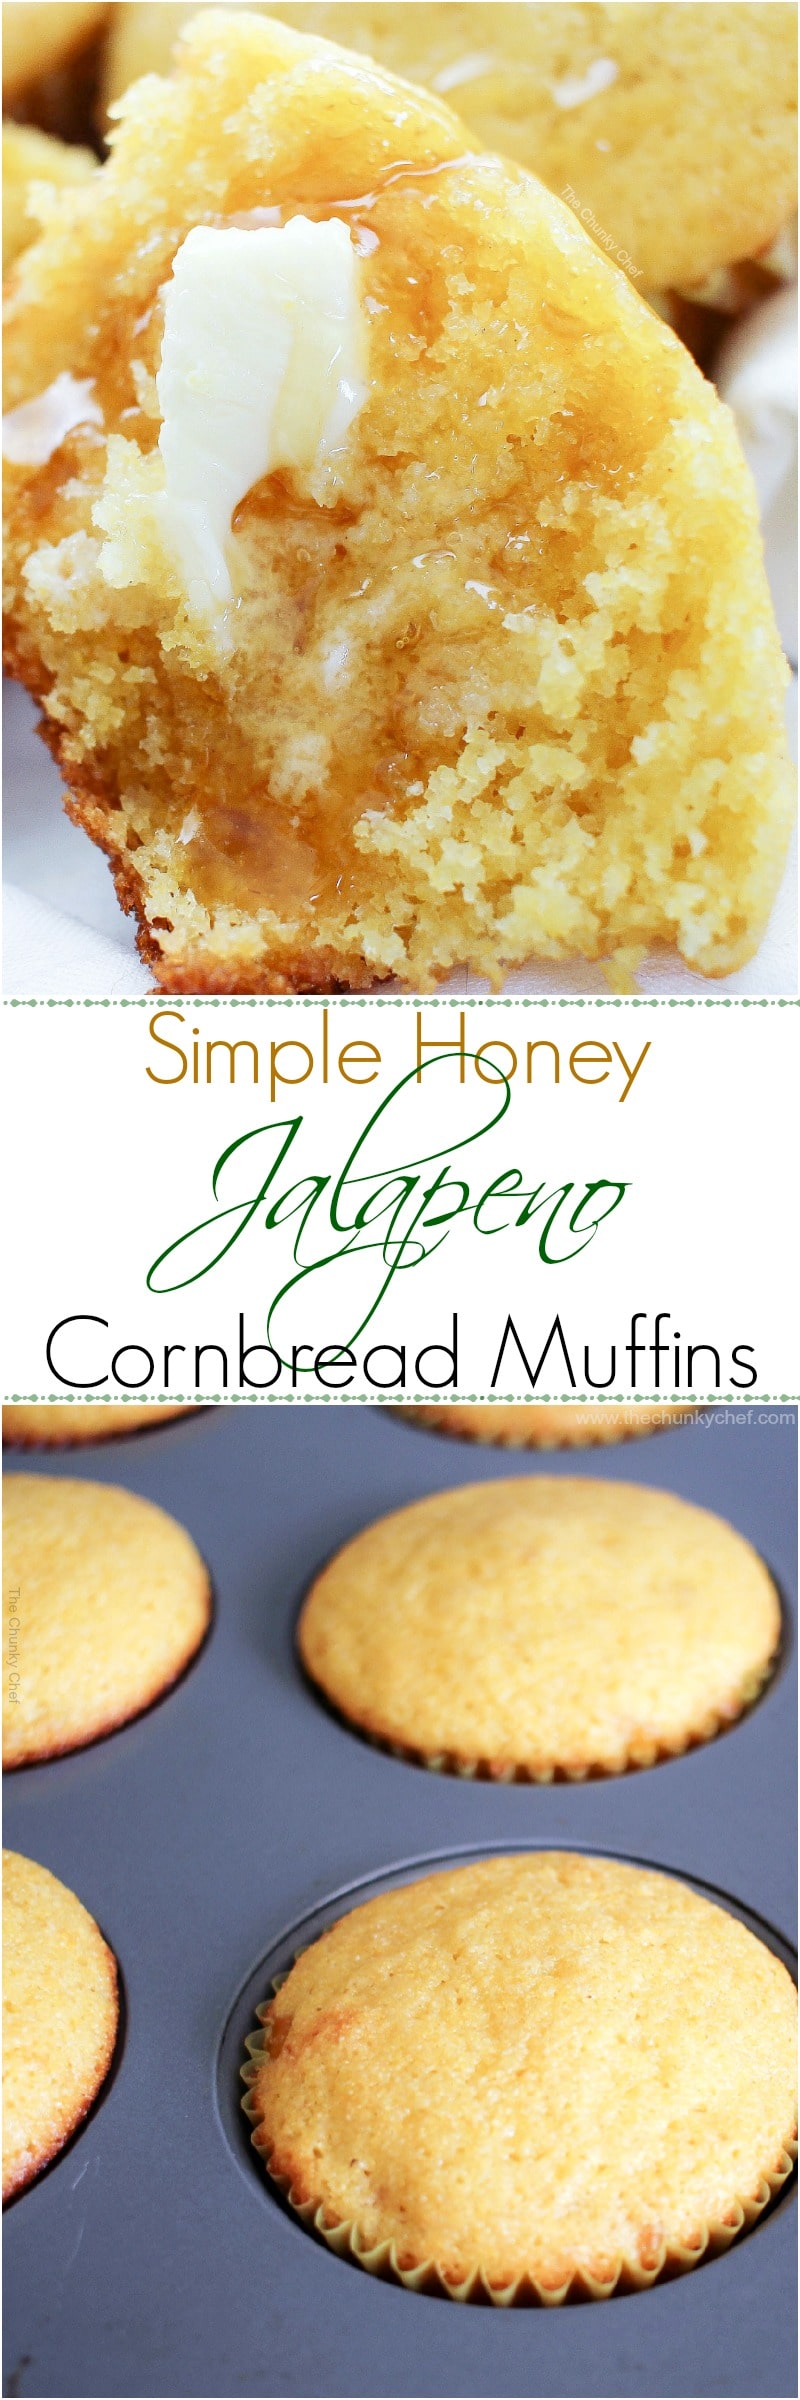 Looking for a great cornbread recipe? You HAVE to try these soft and fluffy honey jalapeno cornbread muffins... they are sure to be a favorite!